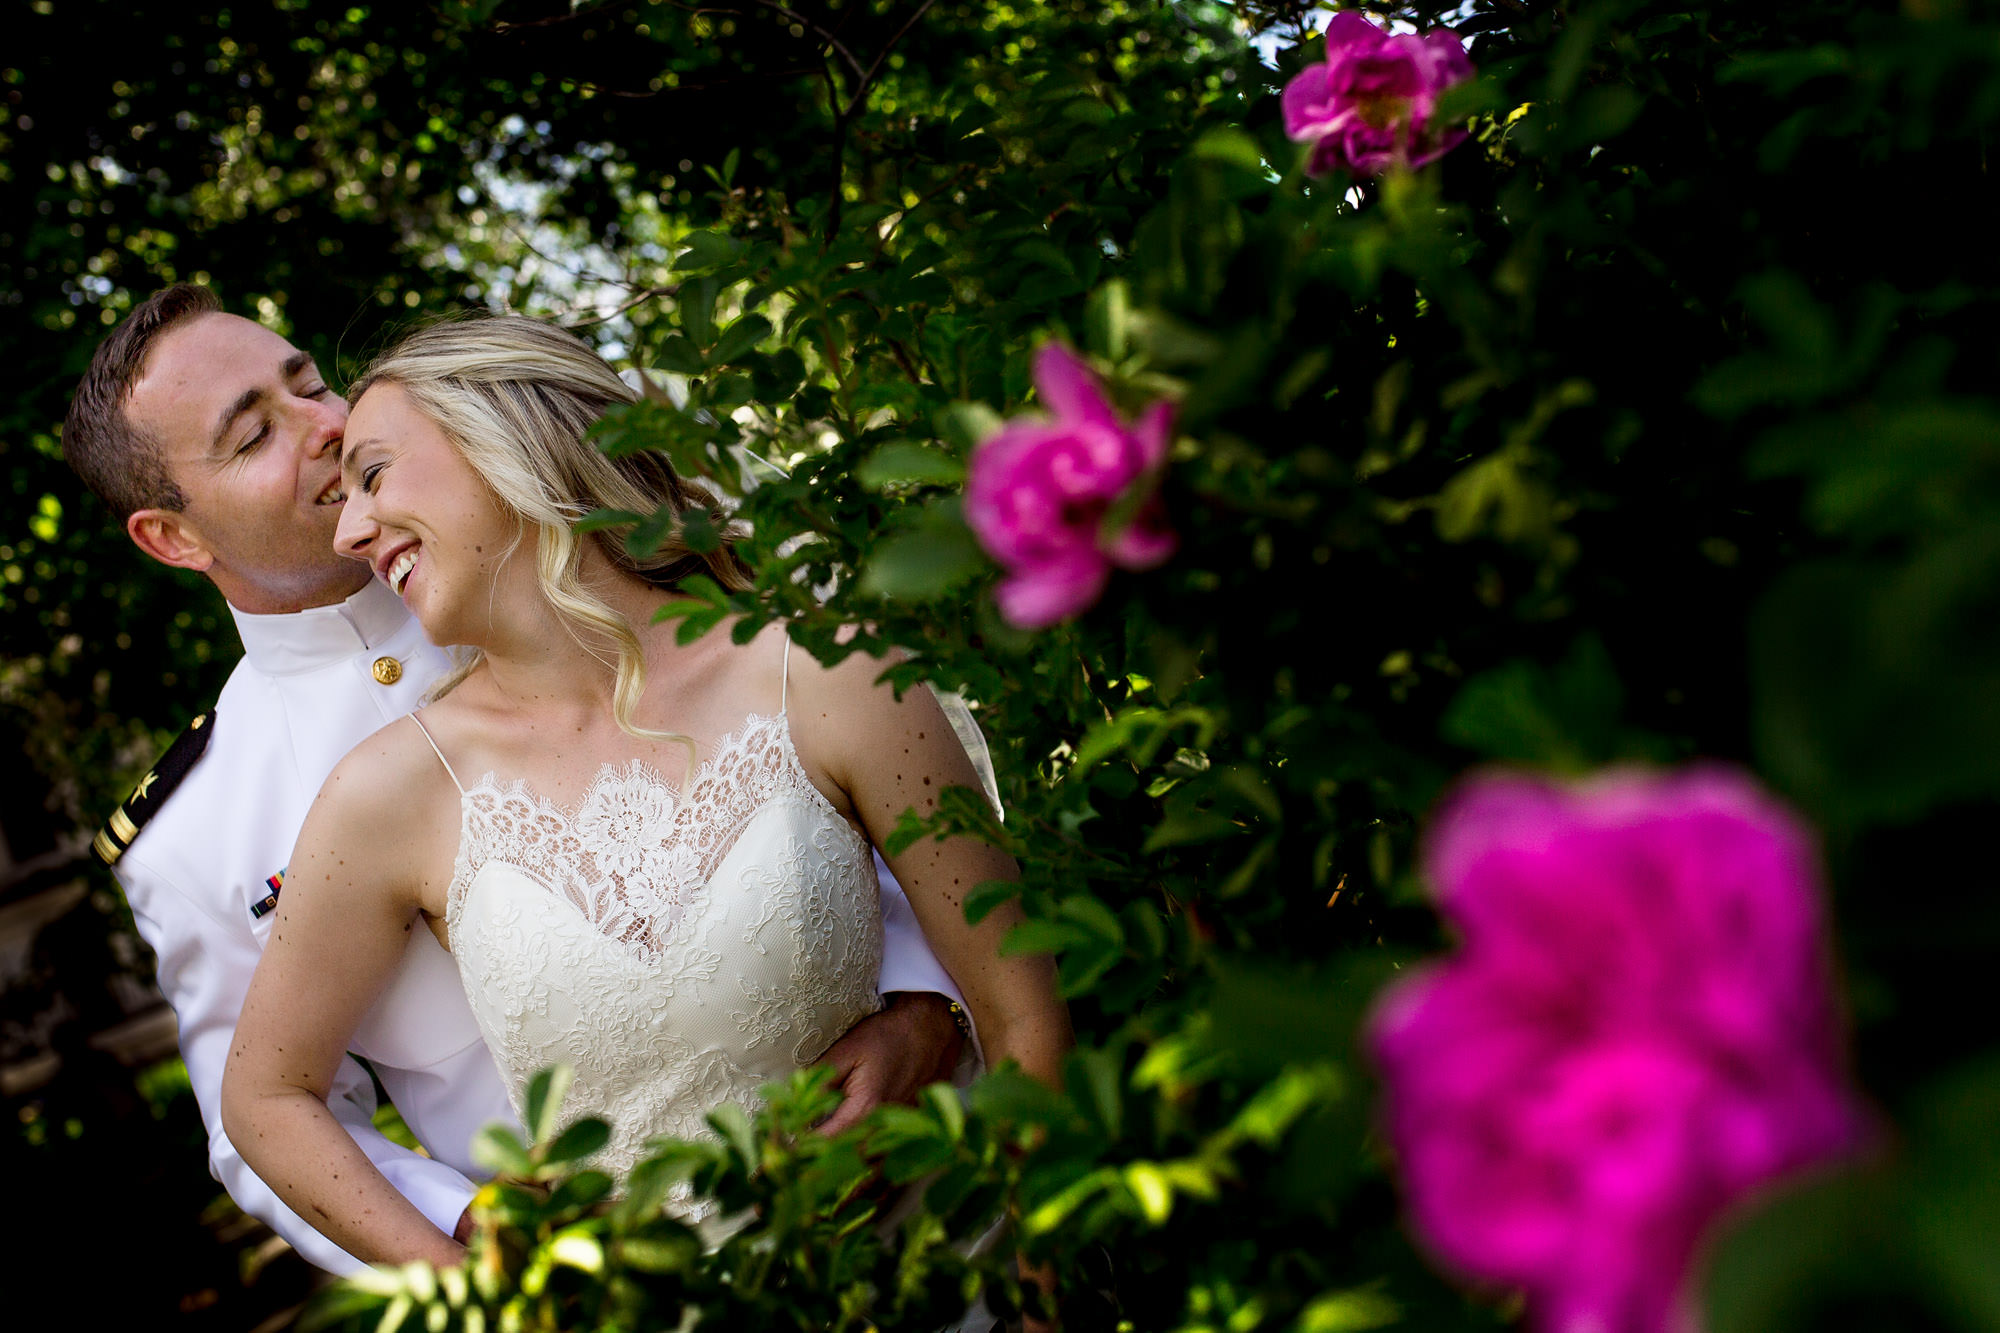 A bride and groom wedding portrait in front of flowers in Camden, Maine